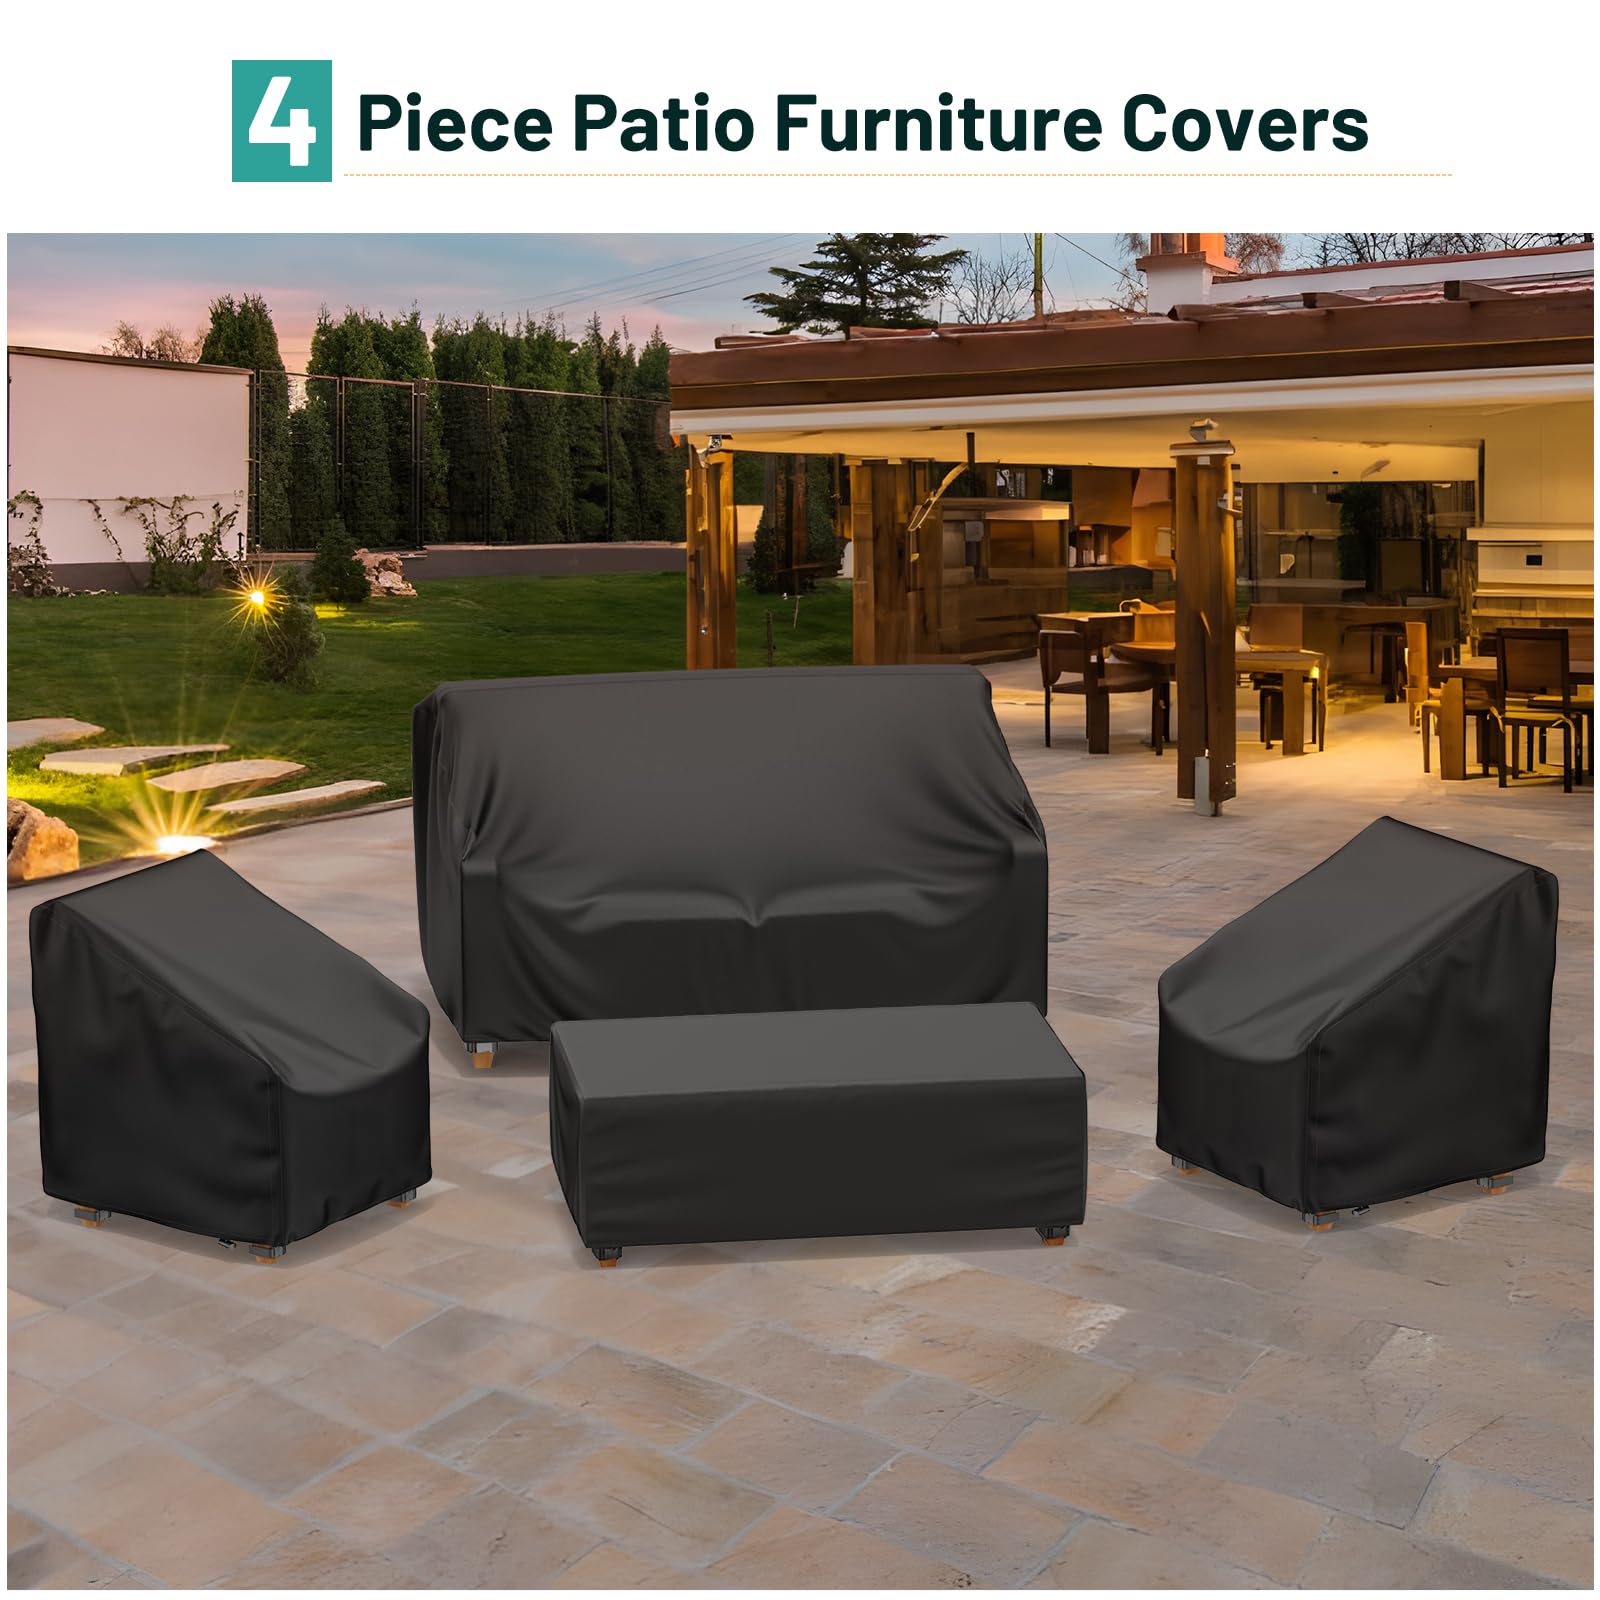 Mrrihand Patio Furniture Covers, 4 Piece Outdoor Furniture Cover Waterproof includ Ourdoor Sofa Cover, 2 Chair Covers, Coffee Table Cover with Windproof Buckle Strap and Adjustable Drawstring